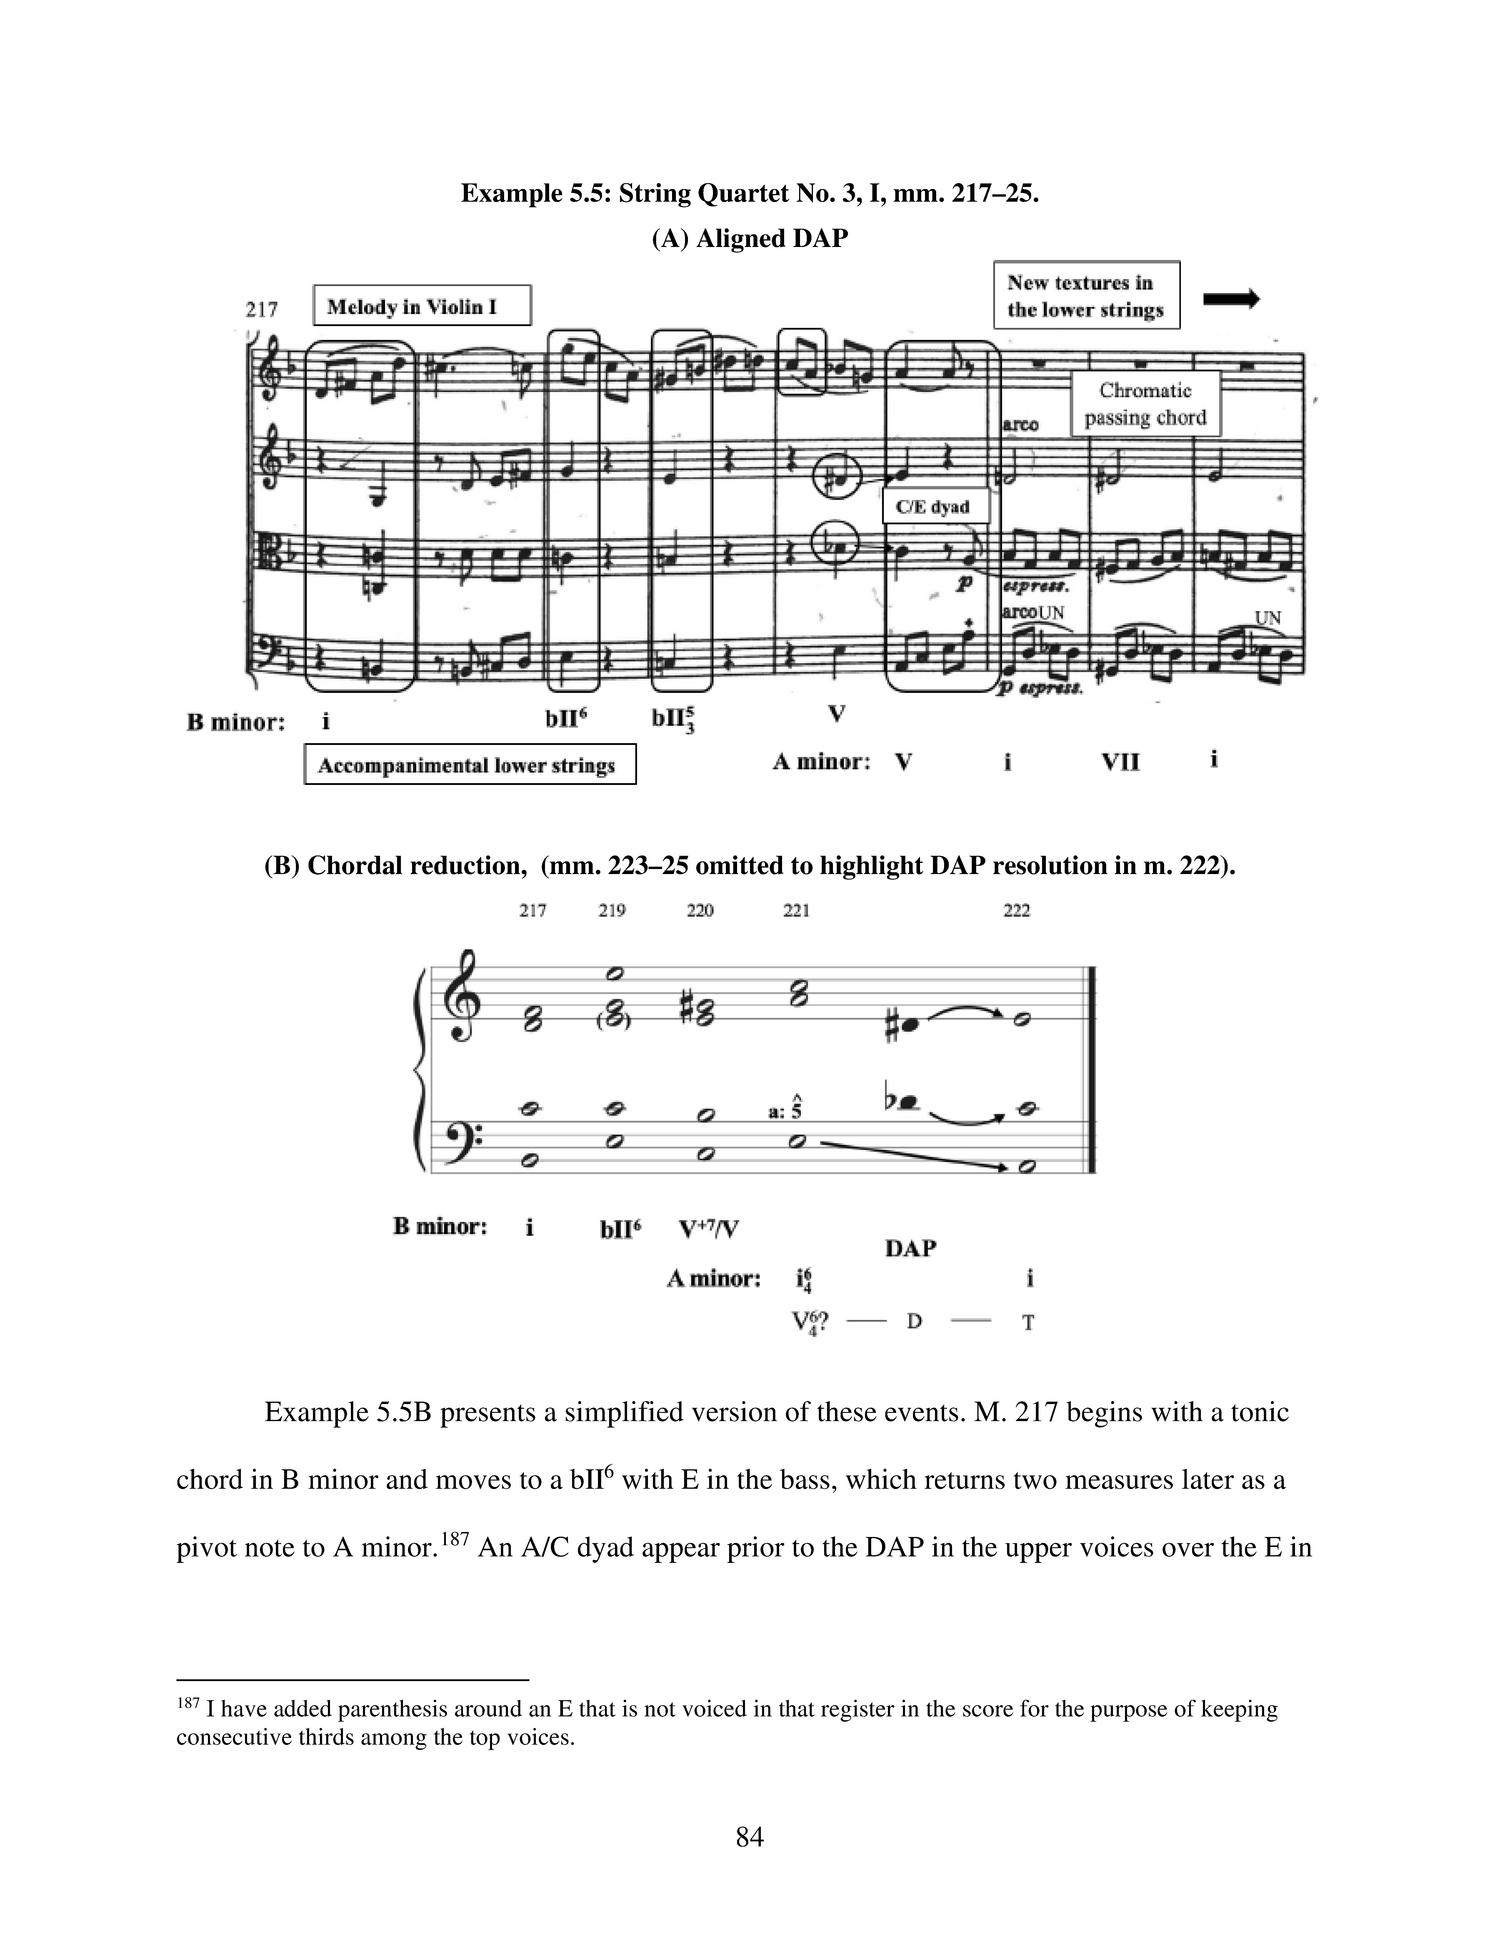 Developing Ogolevets's Doubly Augmented Prime: Semitonal Voice Leading in the Music of Shostakovich
                                                
                                                    84
                                                